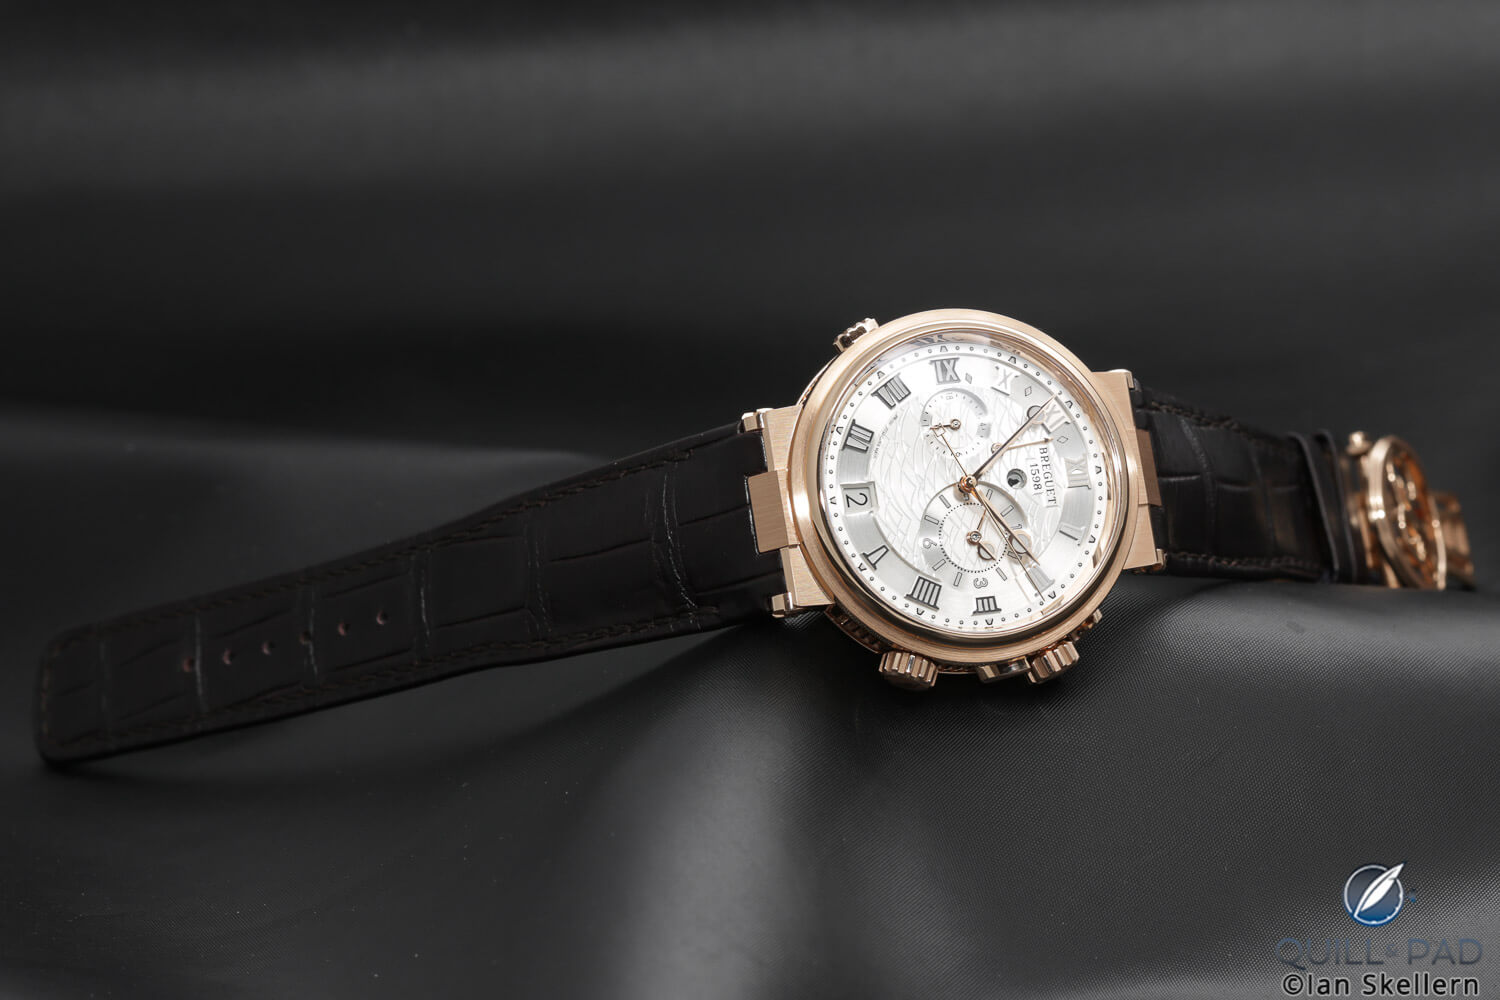 Breguet Marine Alarme Musicale Reference 5547 in pink gold